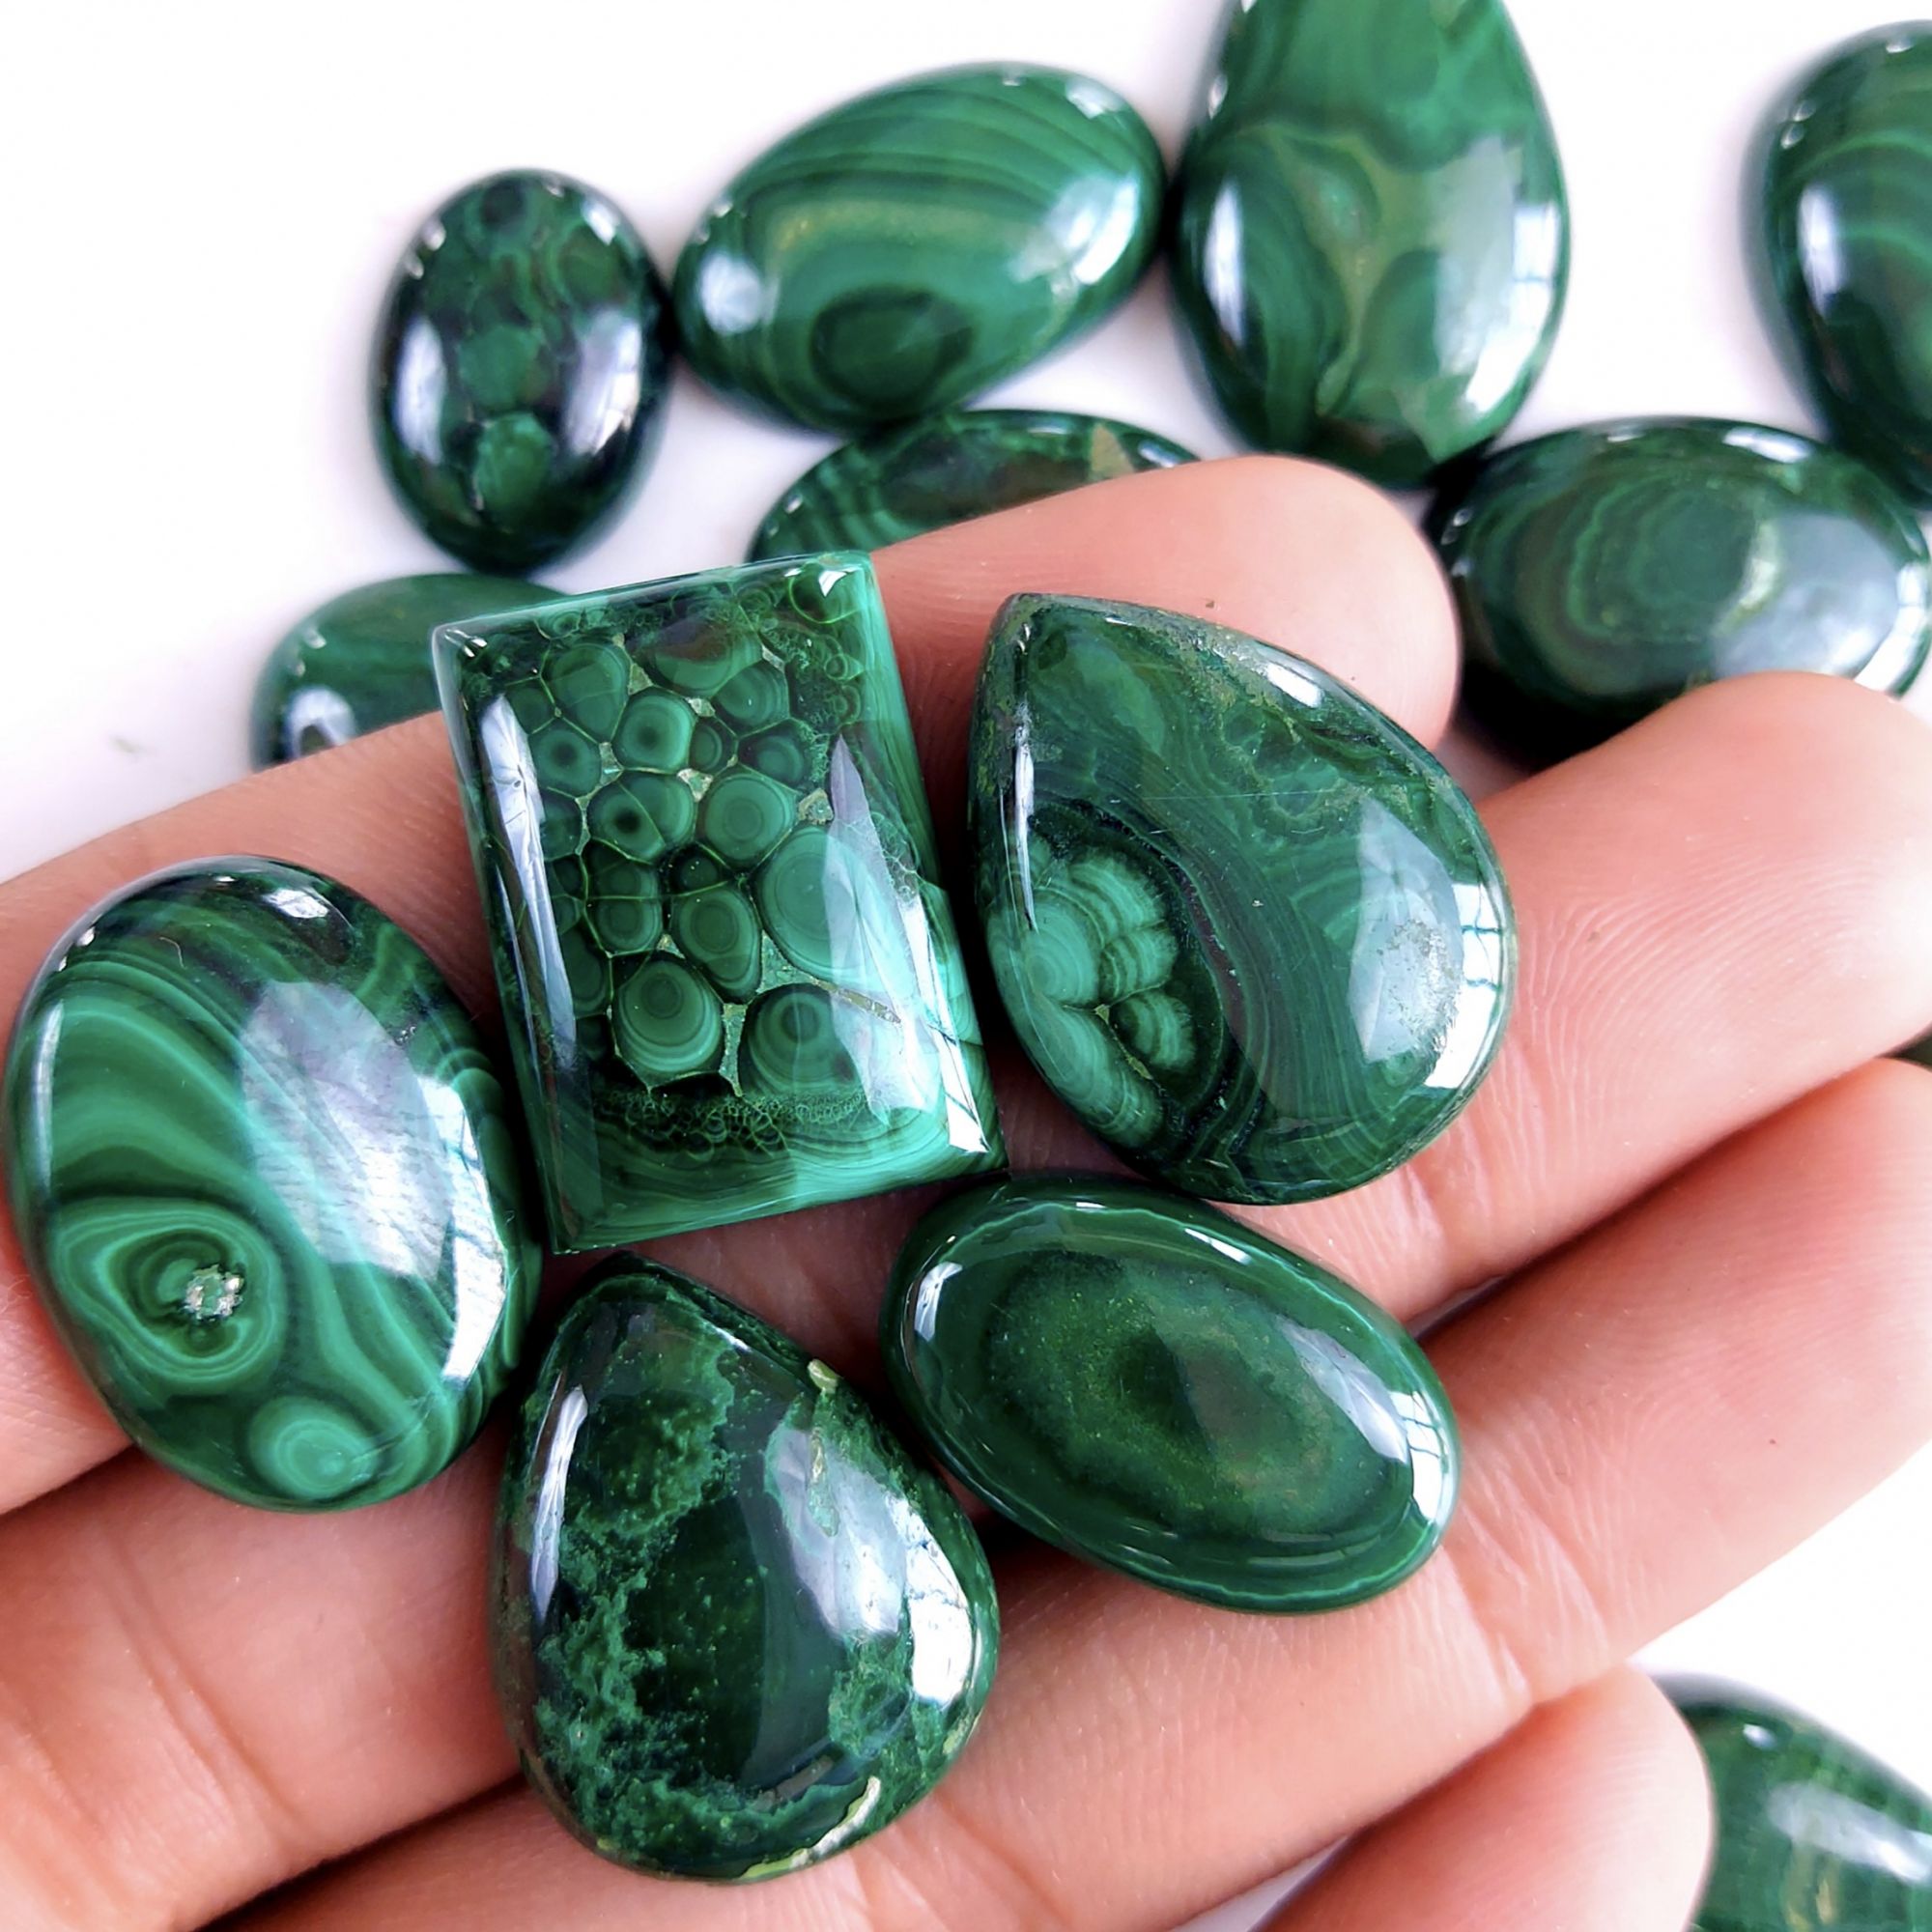 16Pcs 386Cts Natural Green Malachite Flat Back Loose Cabochon Gemstone For Handmade Jewelry Making and Craft Supplies 20x14 16x10mm#9339